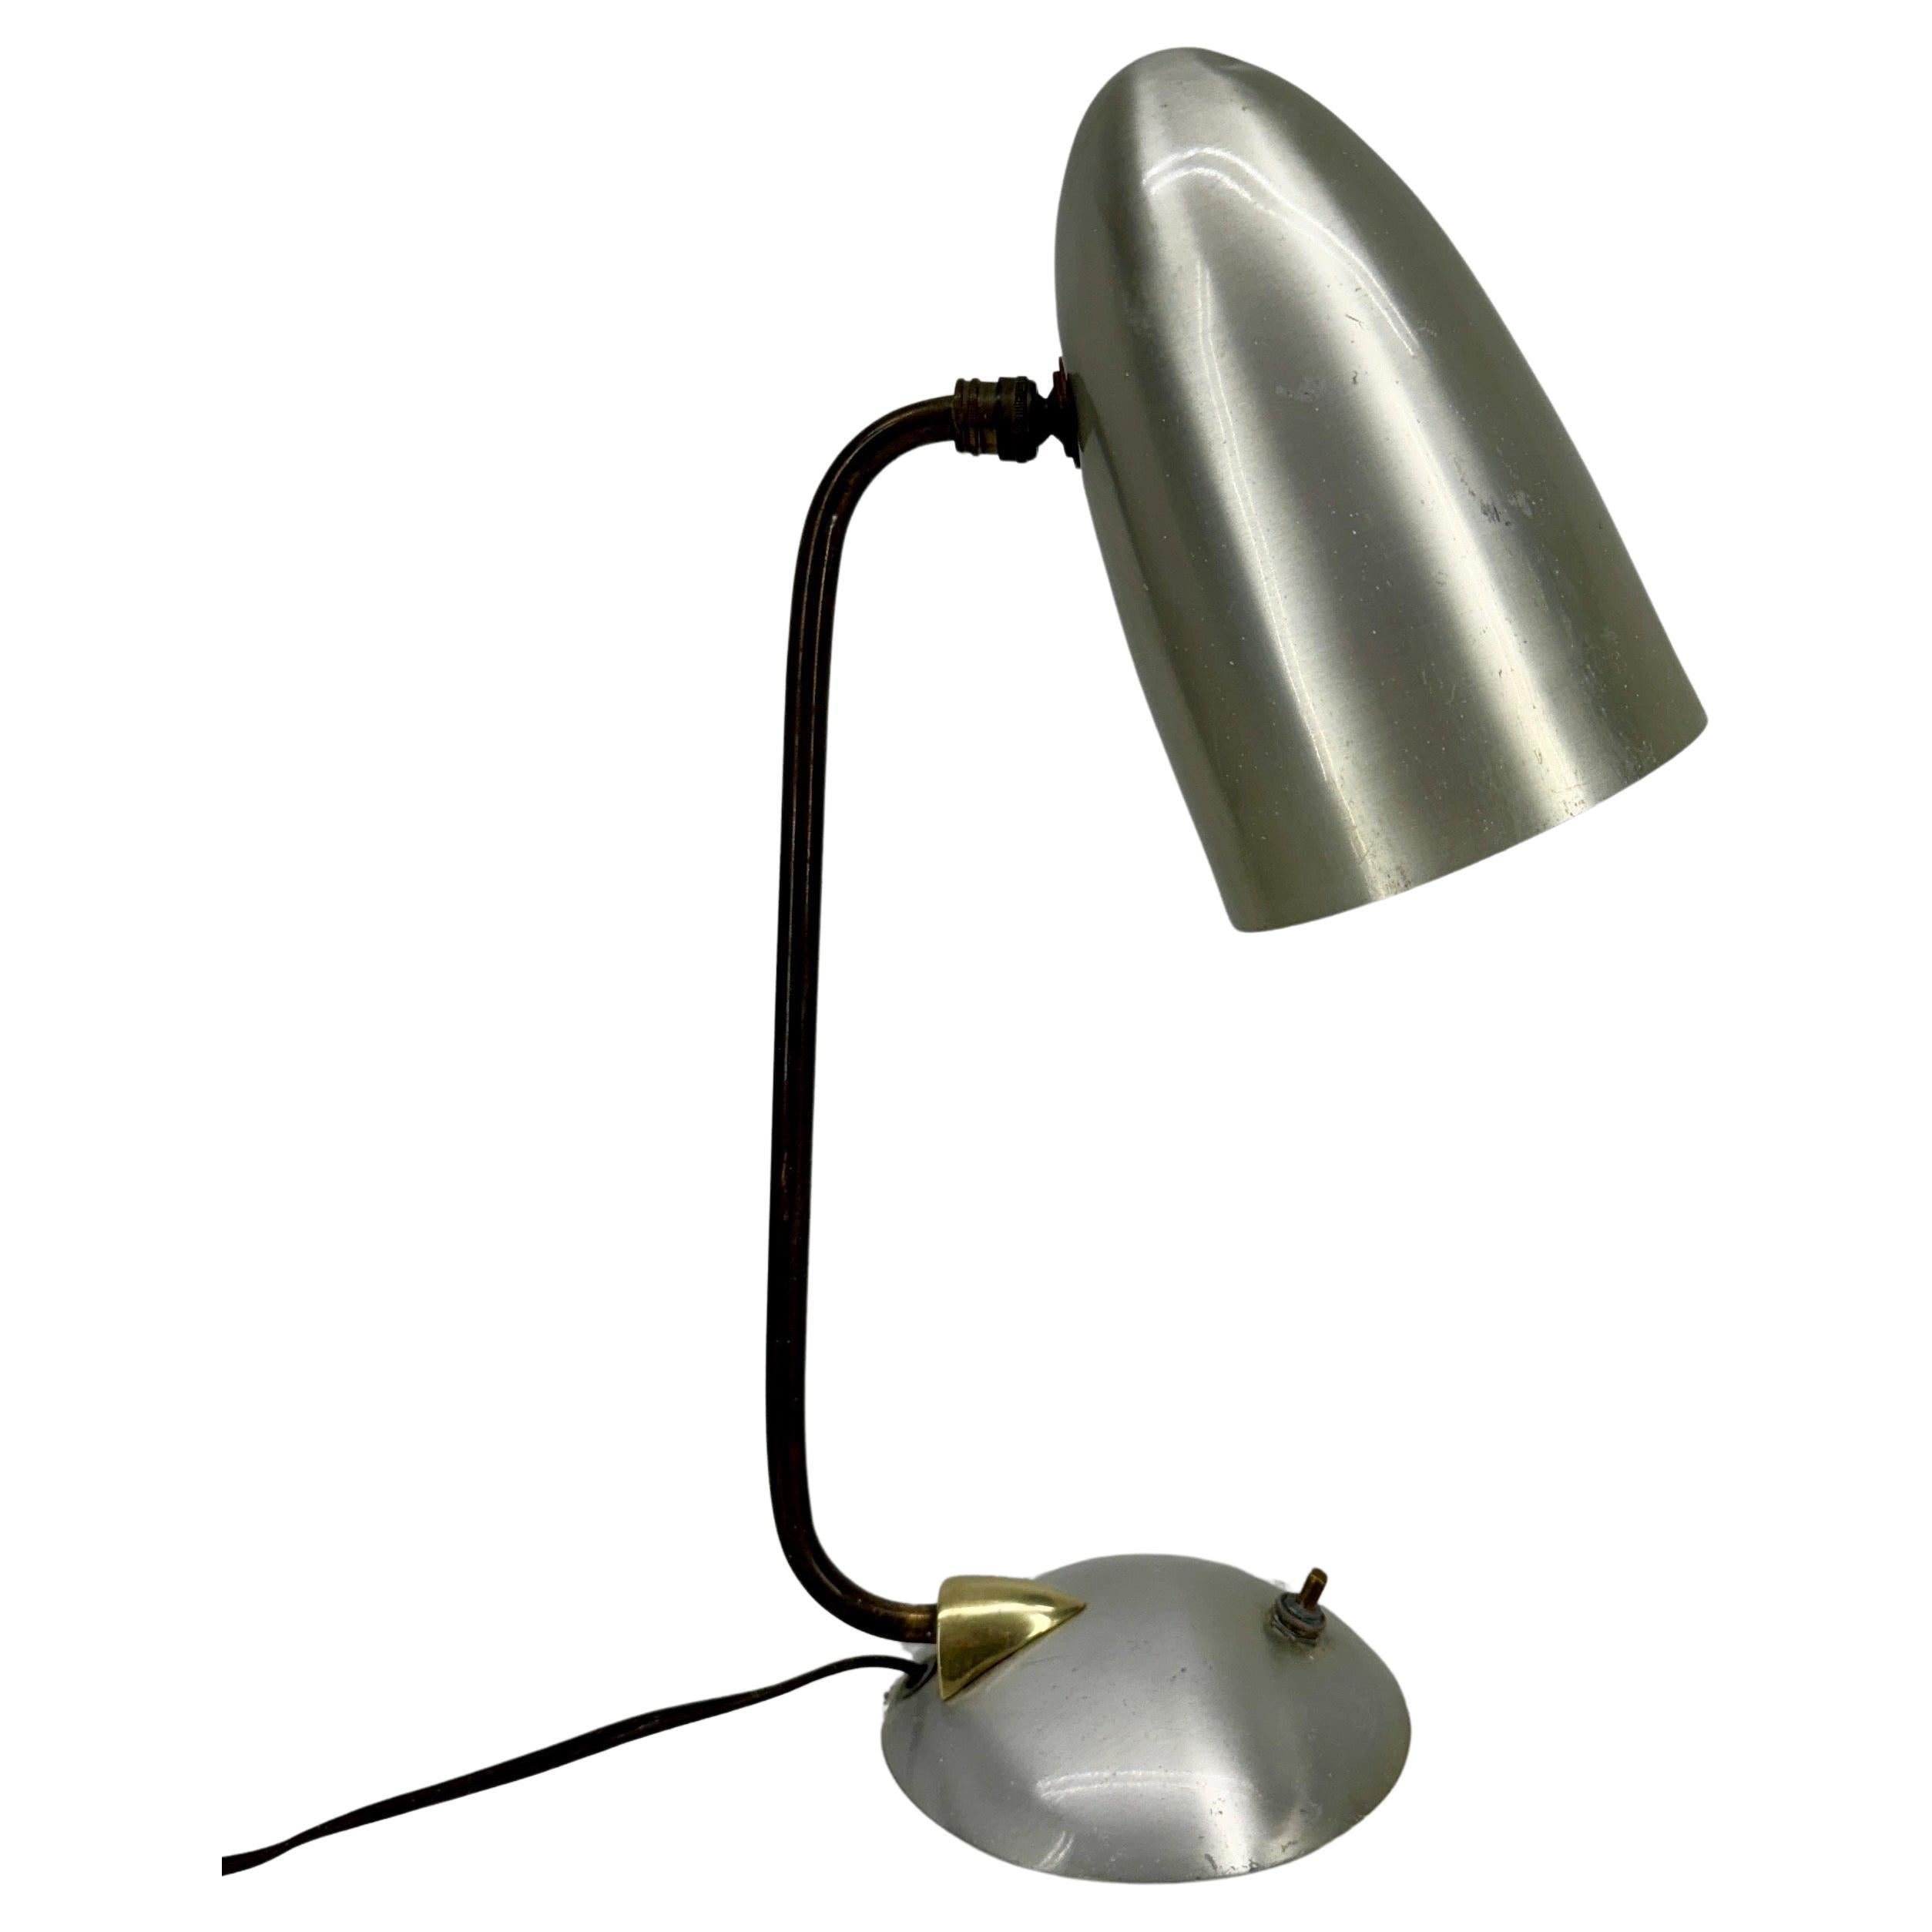 Brushed Chrome, Brass and Bronze Goose-Neck Table Lamp, Mid-Century Modern